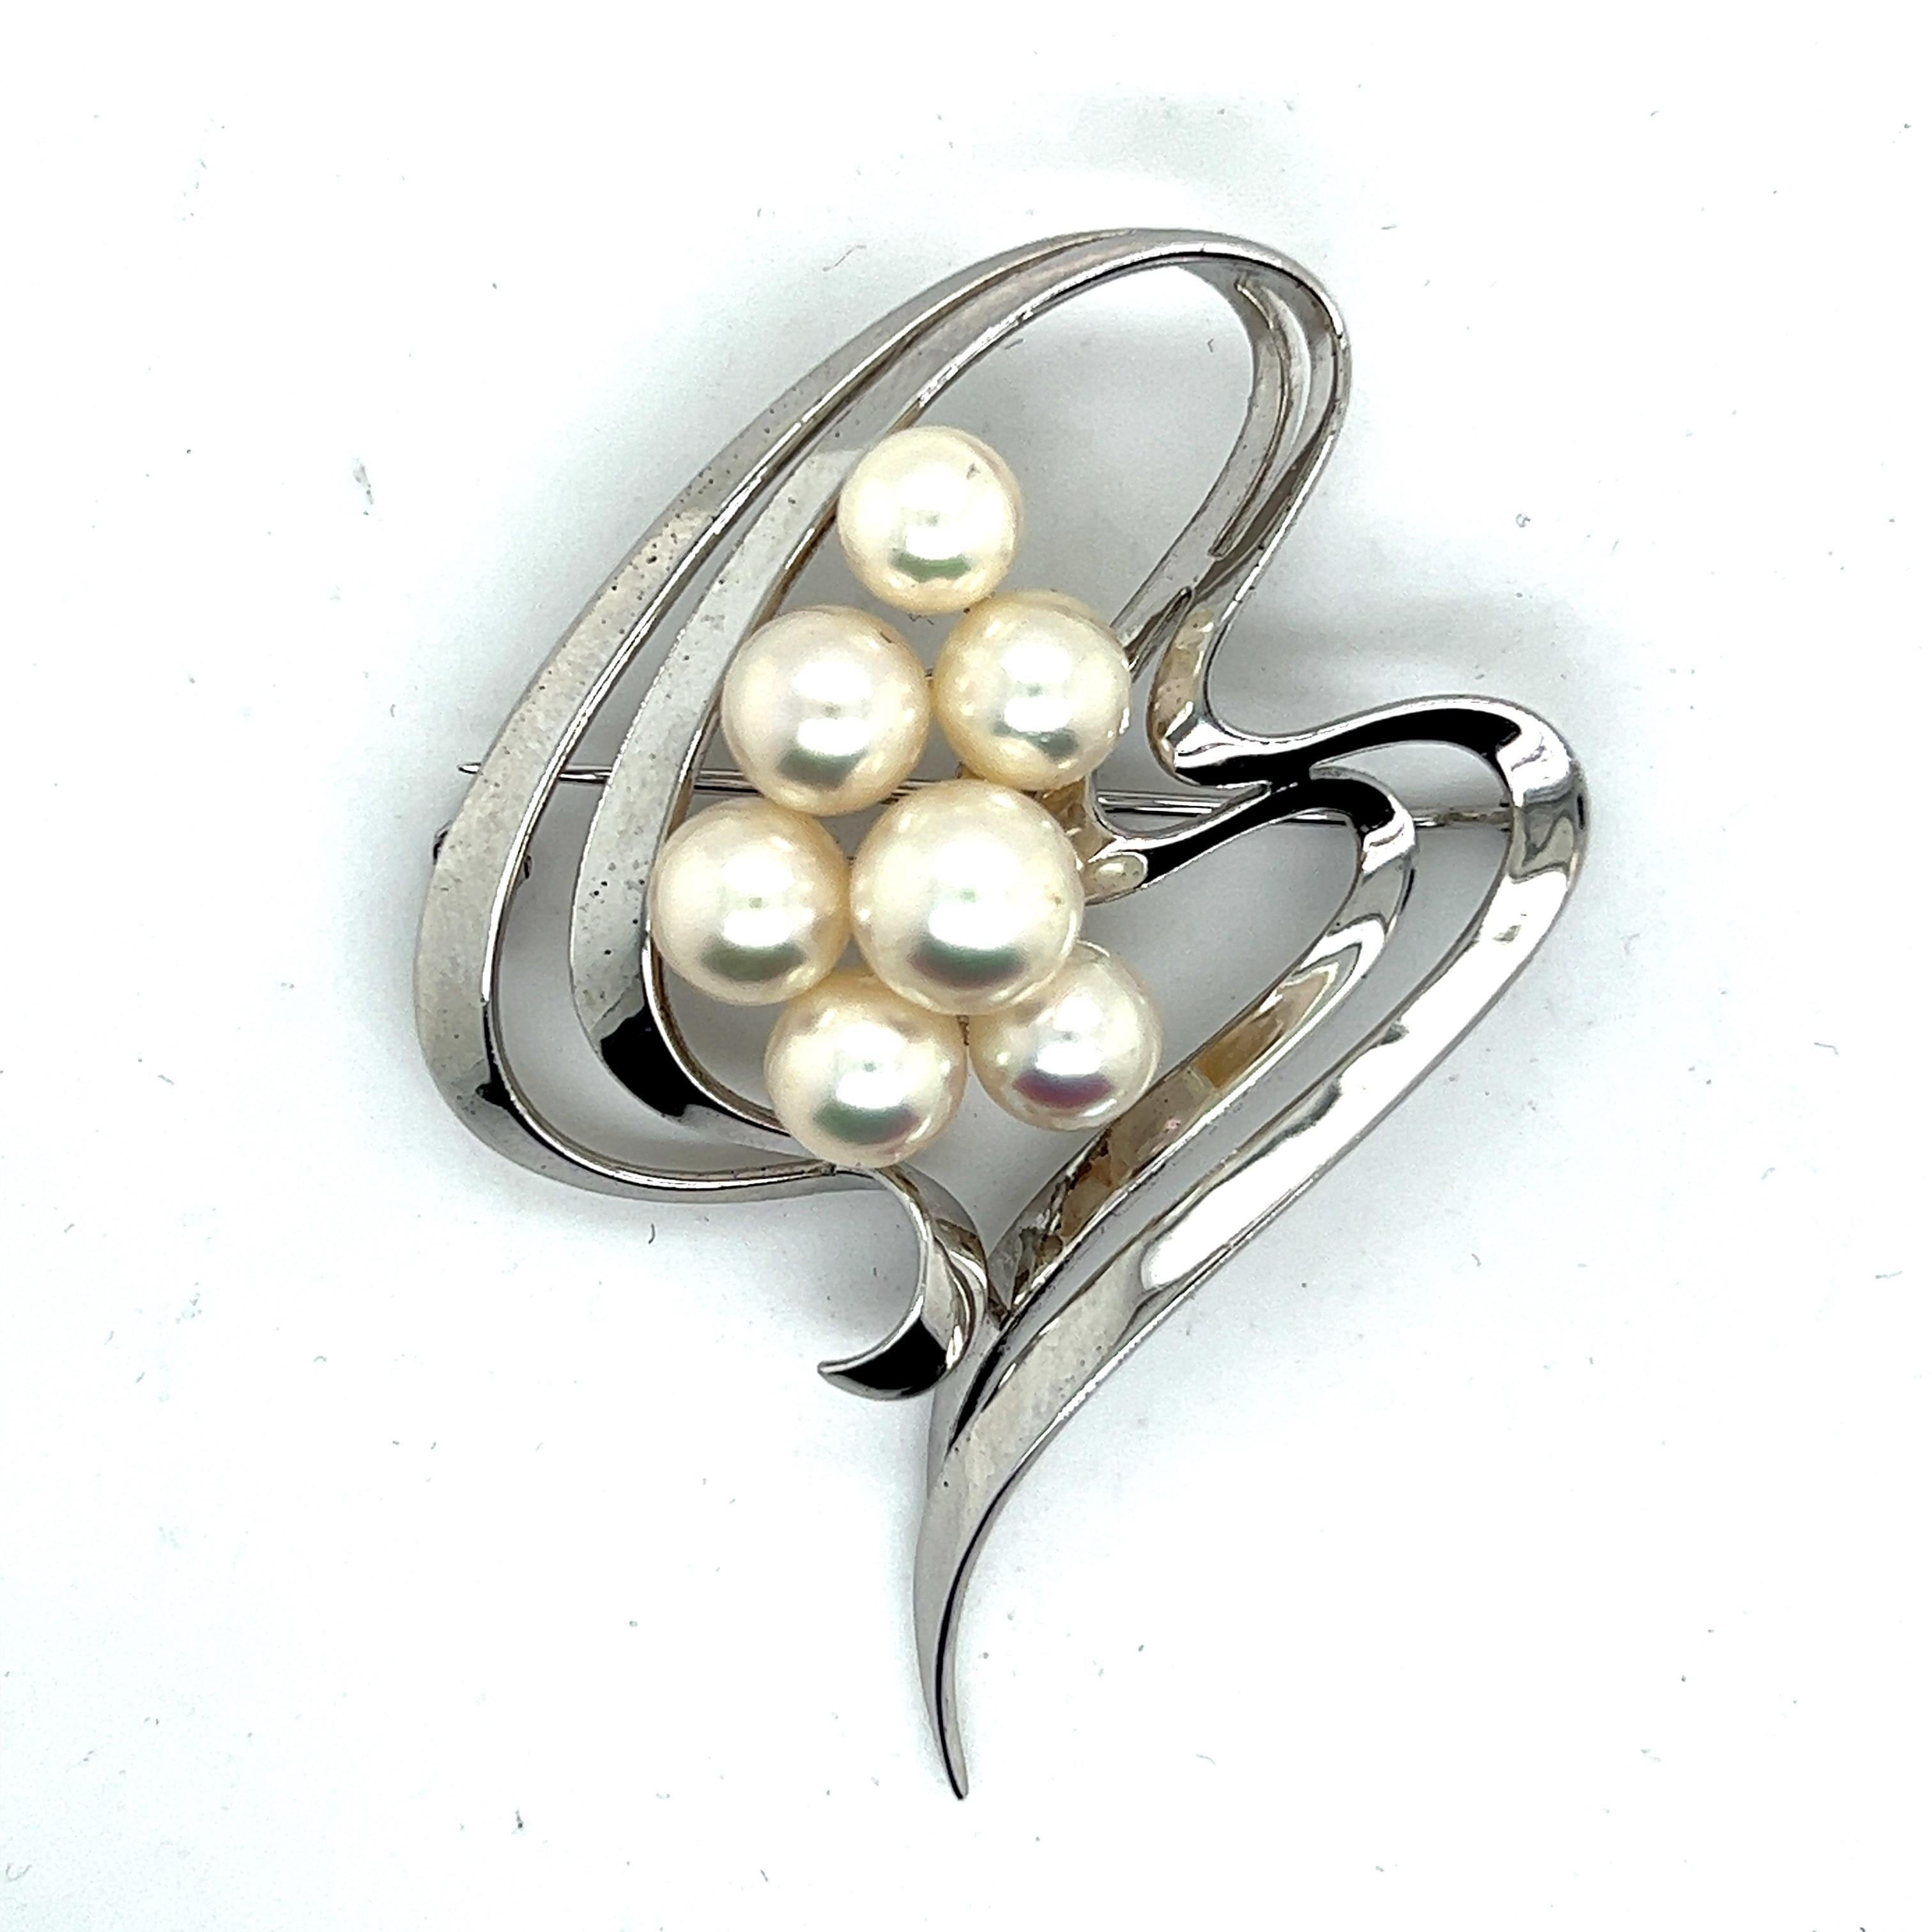 Mikimoto Estate Akoya Pearl Brooch Pin Sterling Silver 8 mm M294

This elegant Authentic Mikimoto Estate Akoya pearl brooch pin is made of sterling silver and has 7 Akoya Cultured Pearls ranging in size from 8 mm and a weight of 11.8 grams.

TRUSTED